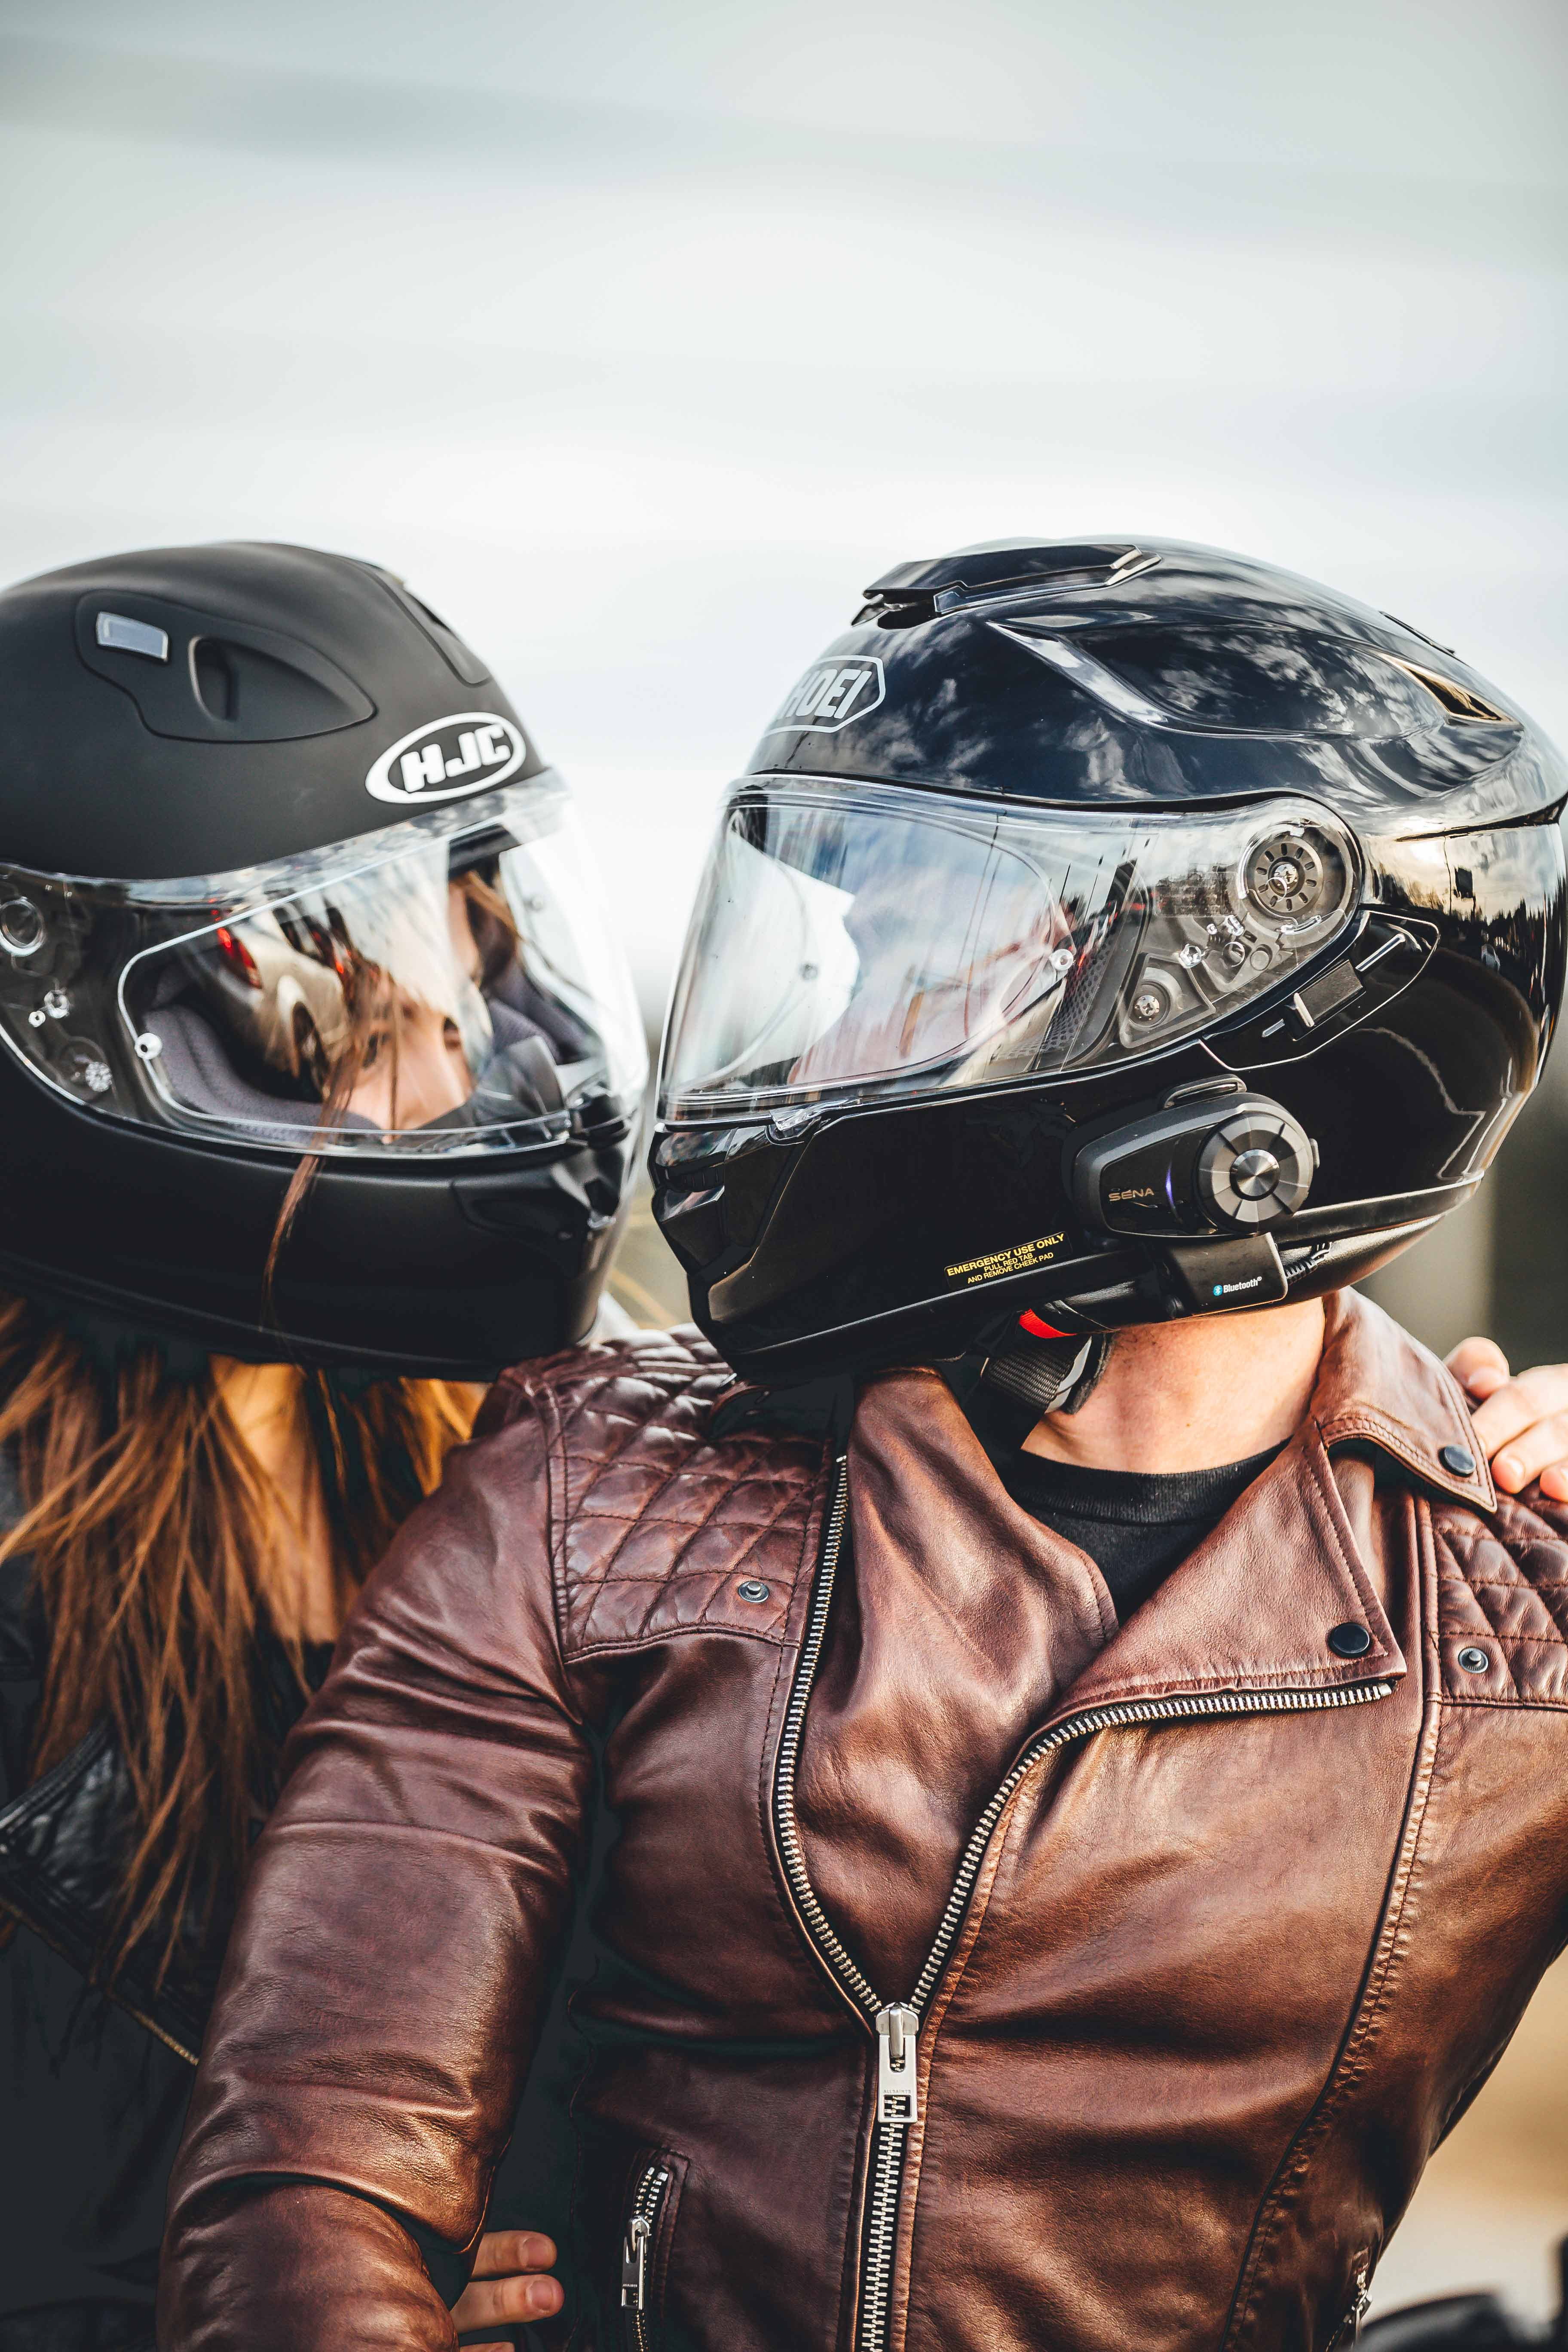 man and woman riding motorcycle, helmet, biker, couple, leather jacket